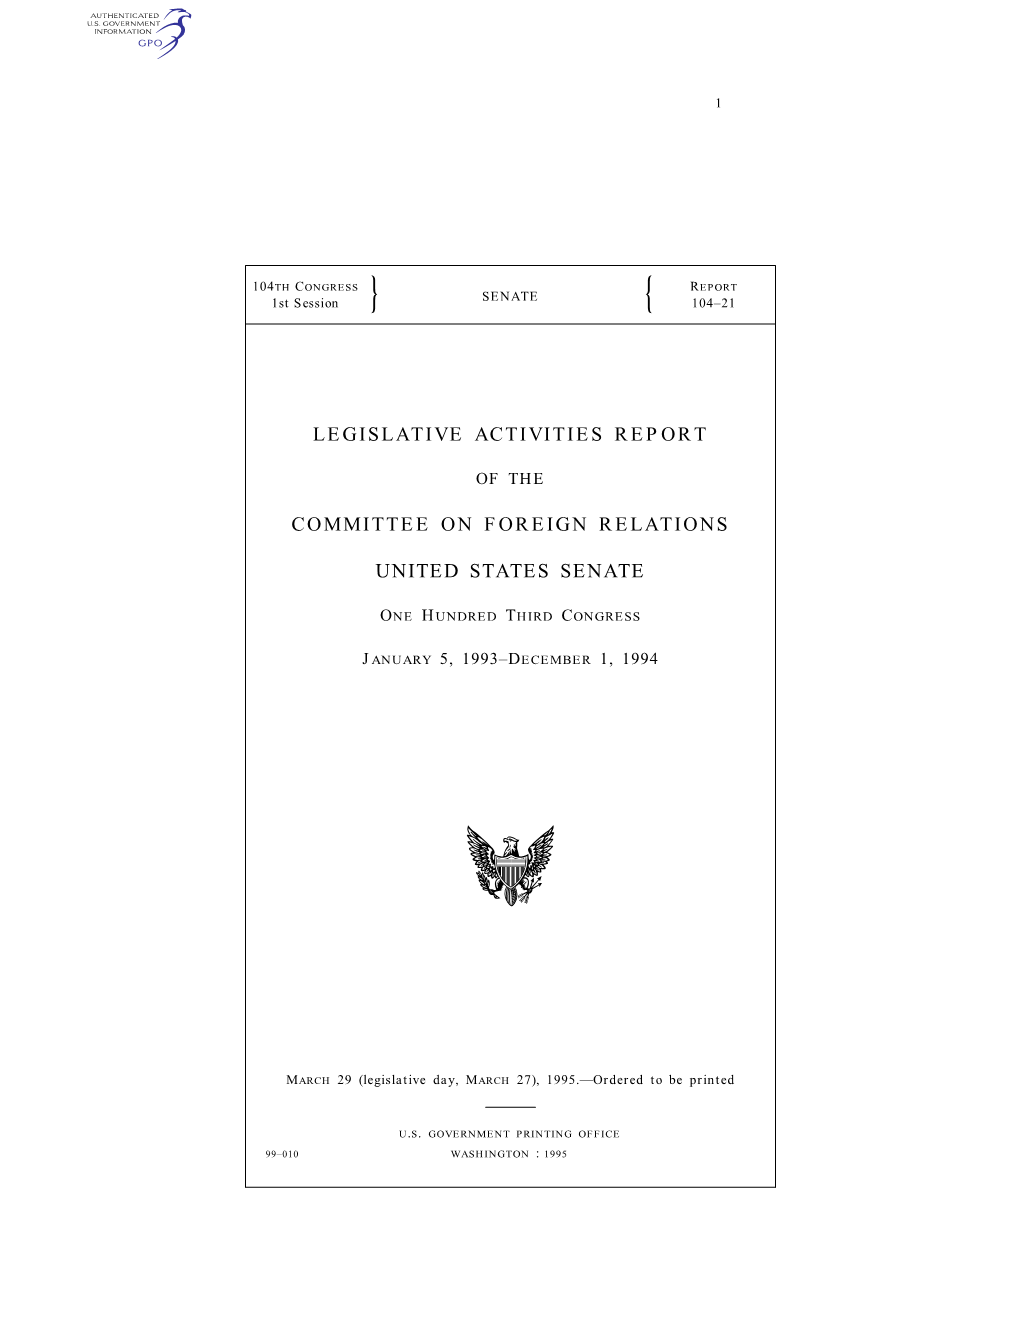 Legislative Activities Report Committee on Foreign Relations United States Senate